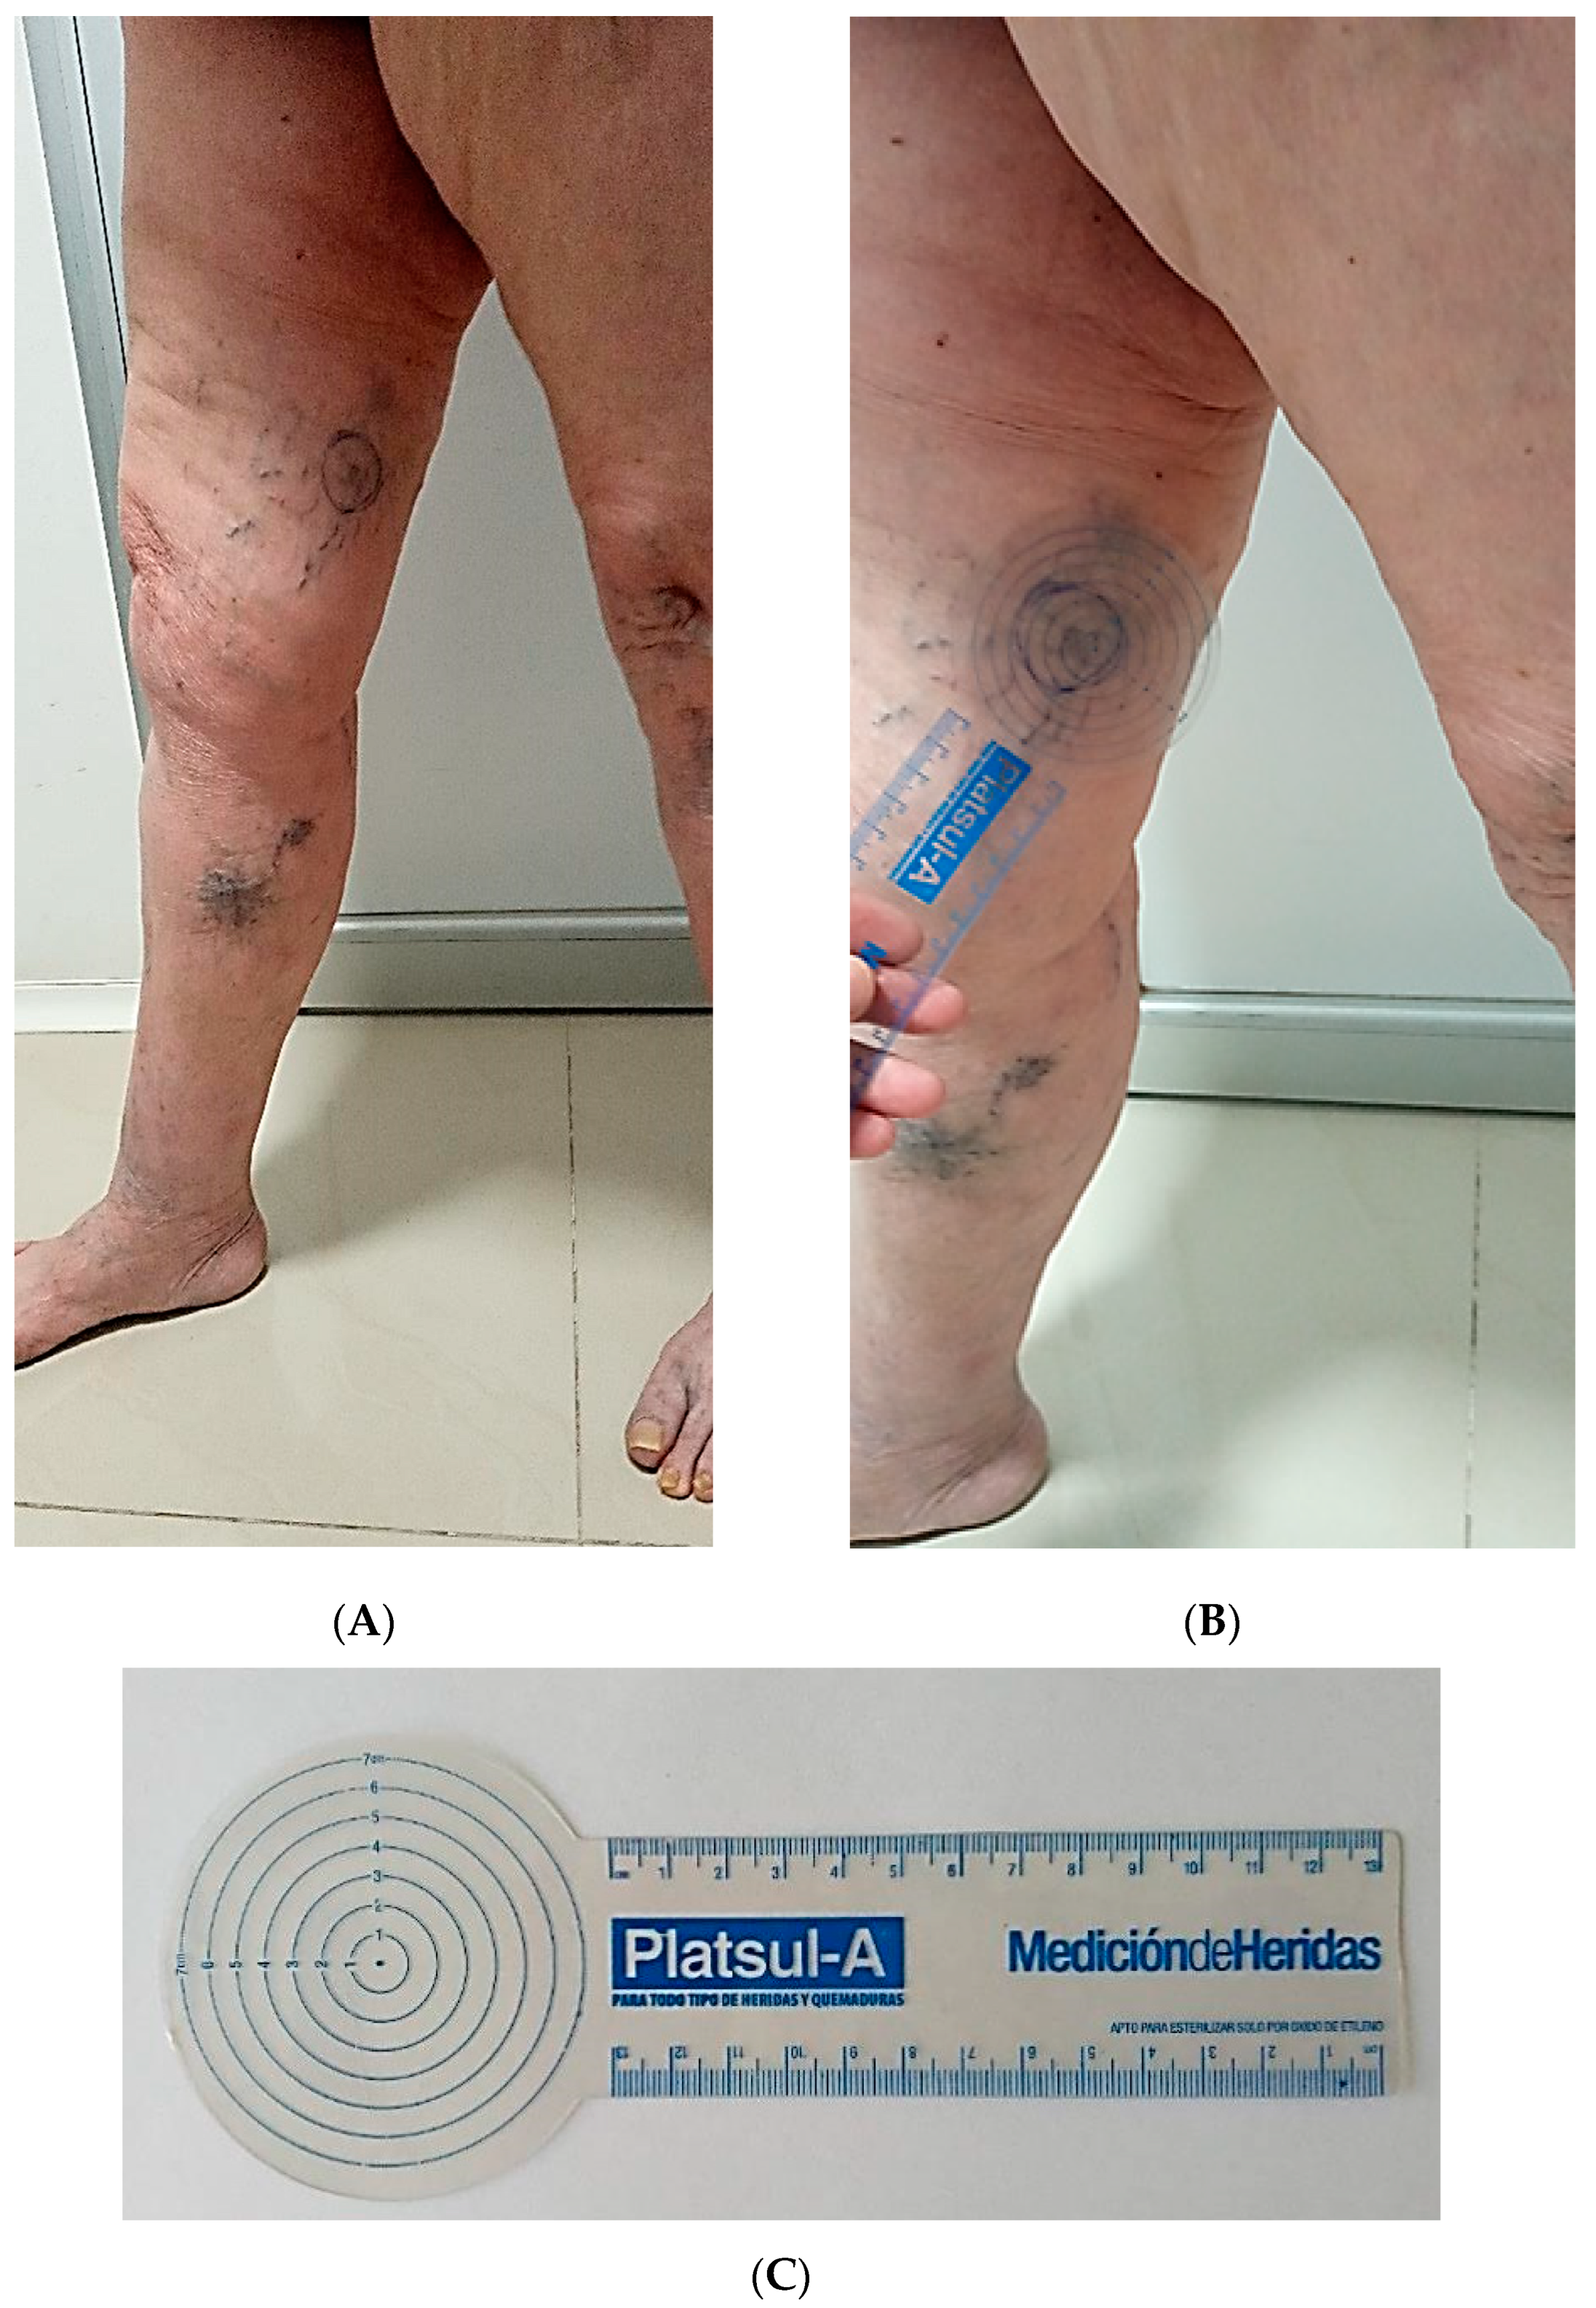 18 Year Old Student Treated for Varicose Veins